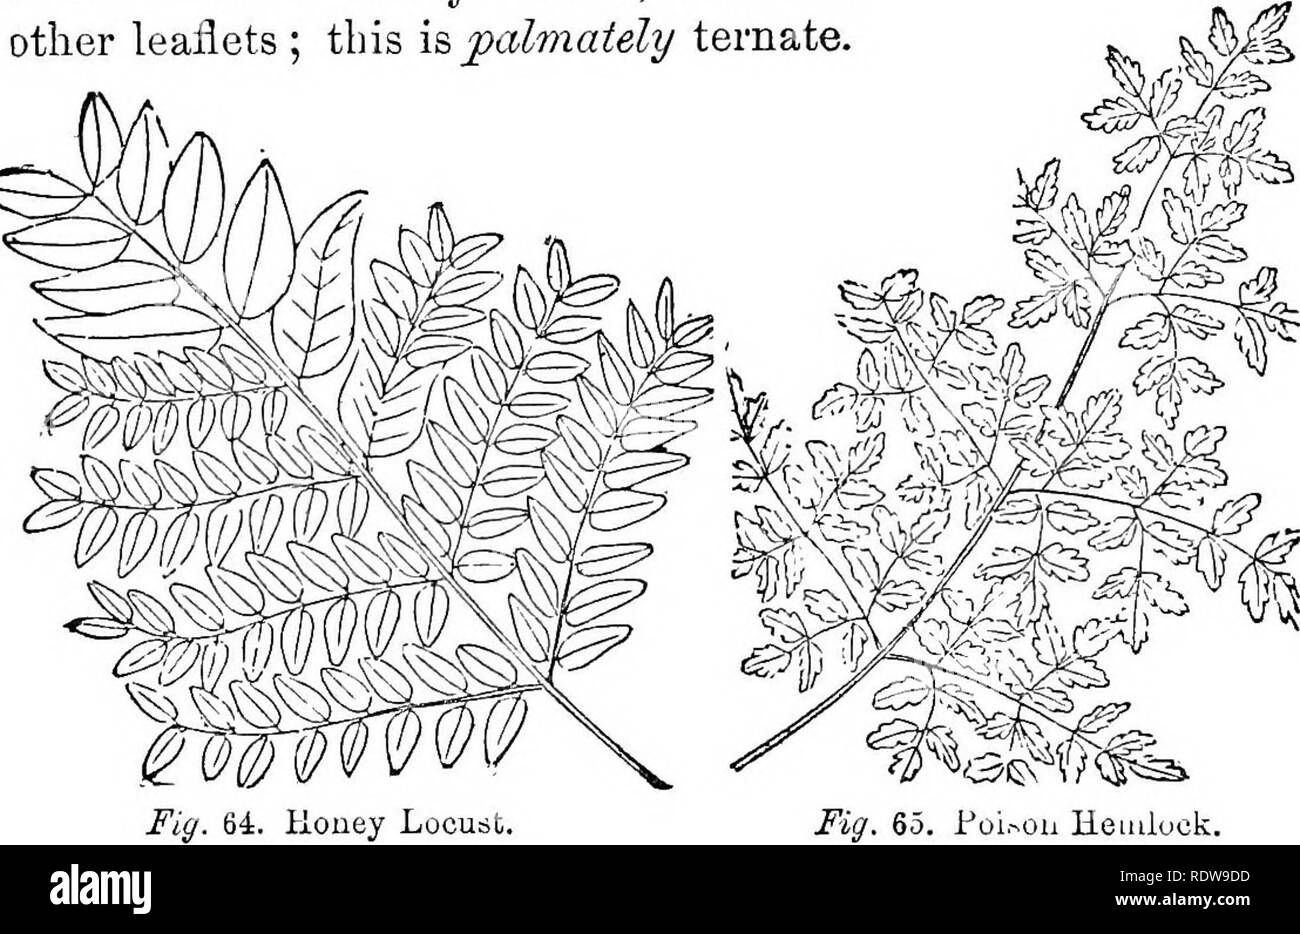 . Leaves and flowers : or, Object lessons in botany with a flora : prepared for beginners in academies and public schools . Botany. 30 OBJECT LESSONS IN BOTANY. 88. Every one knows that the mmiber of leaflets in the Clover is three; also in the Bean, and in this figure (62) of the Desmodium leaf. Such leaves are called ternate. But here the pupil will notice another important distinction. In this Desmodium leaf, the odd leaflet is stalked, and is said to be pinnately ternate ; in Clover, tlie odd leaflet is nearly sessile, like the other leaflets ; this is palmately ternate.. Fig. 65. l*oi.--o Stock Photo